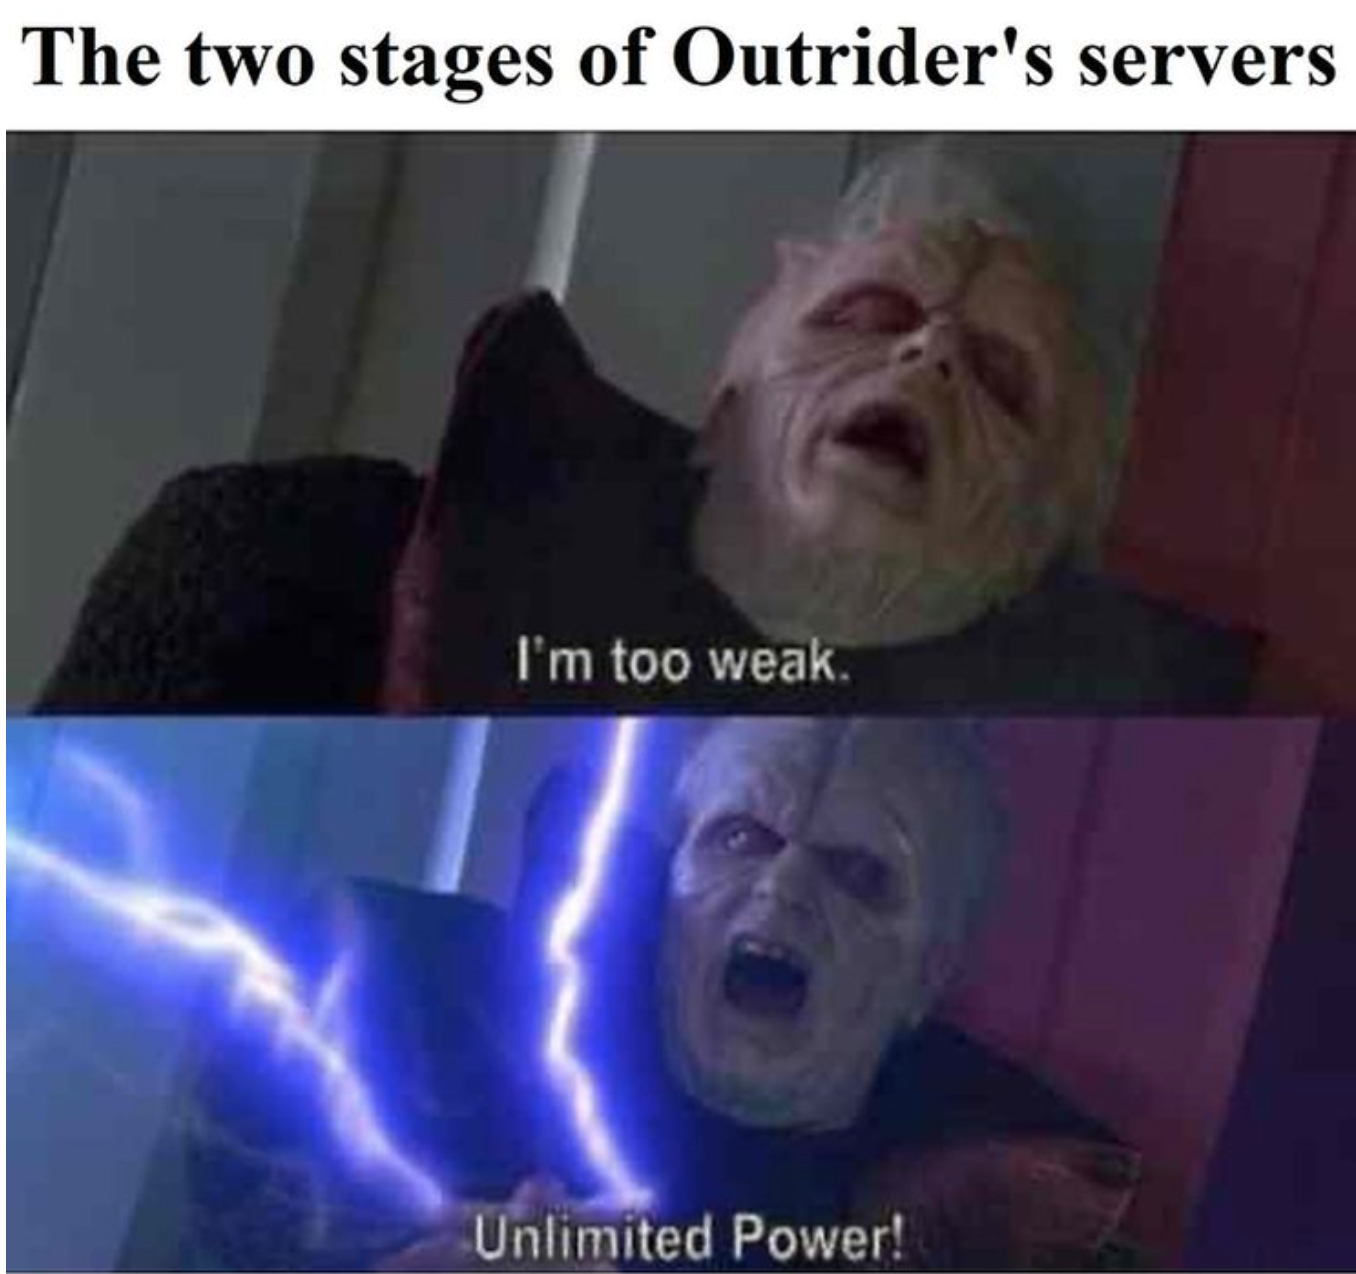 Outriders Memes - i m too weak meme - The two stages of Outrider's servers I'm too weak. Unlimited Power!